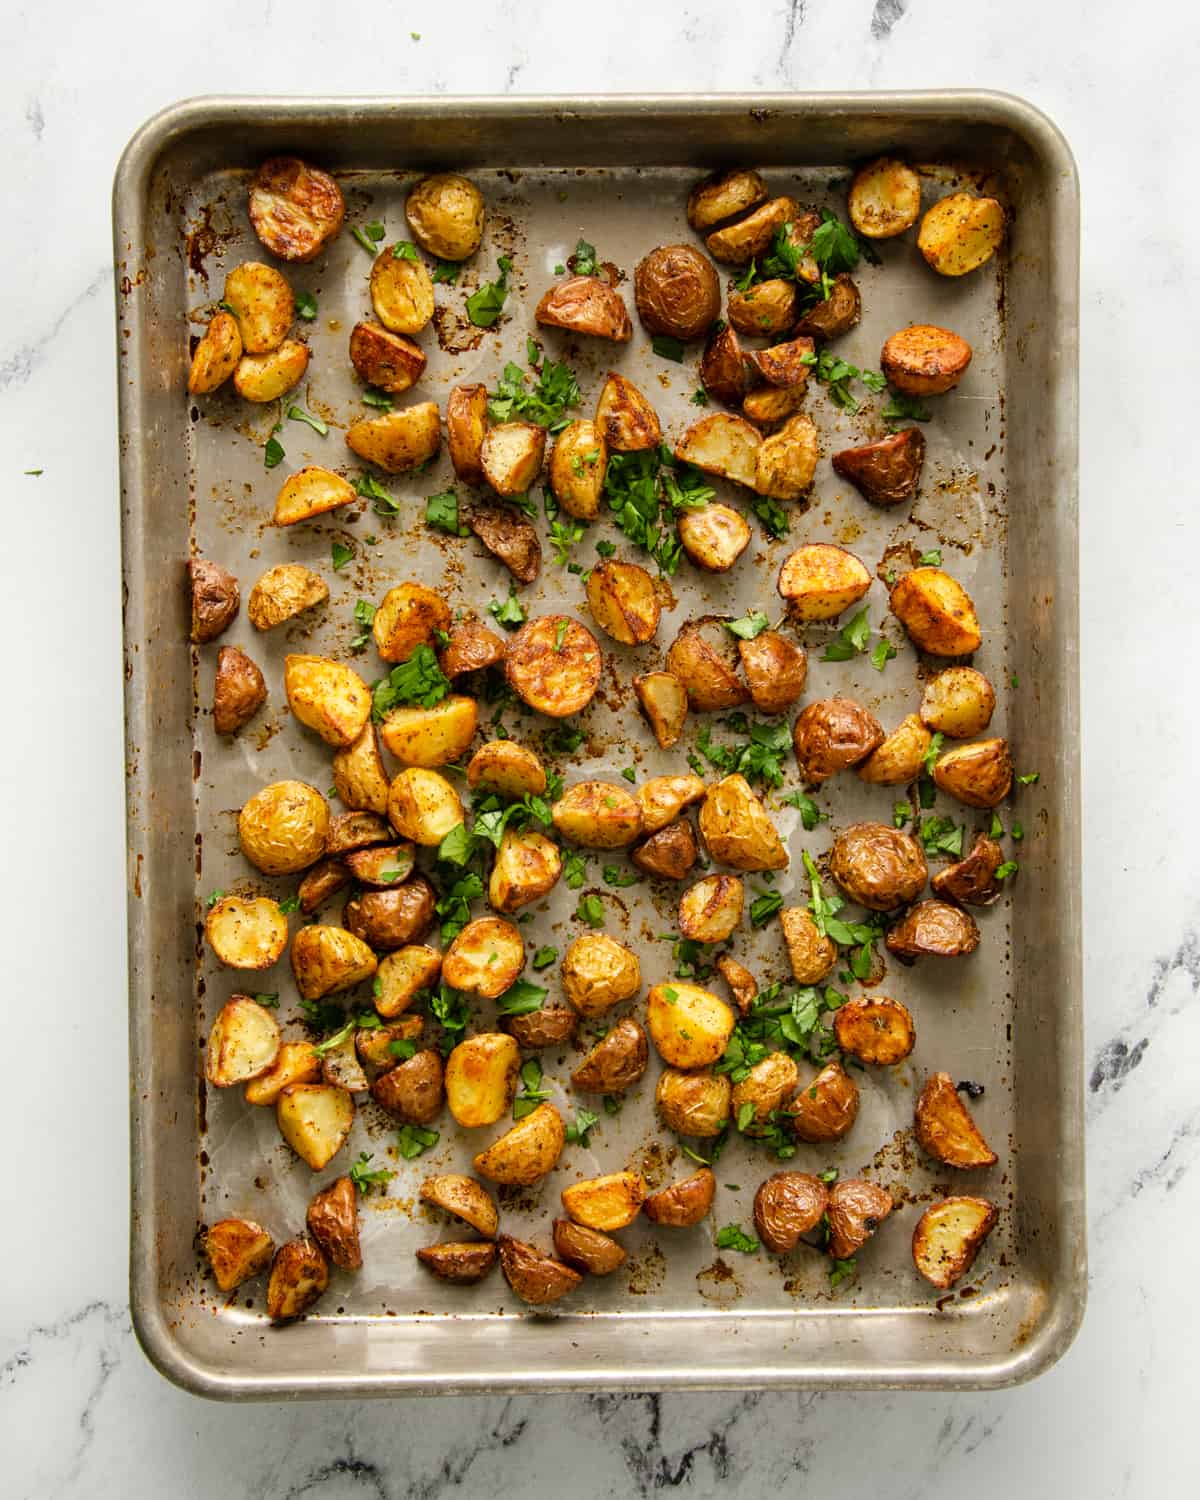 Roasted potatoes on a baking sheet with fresh cilantro.